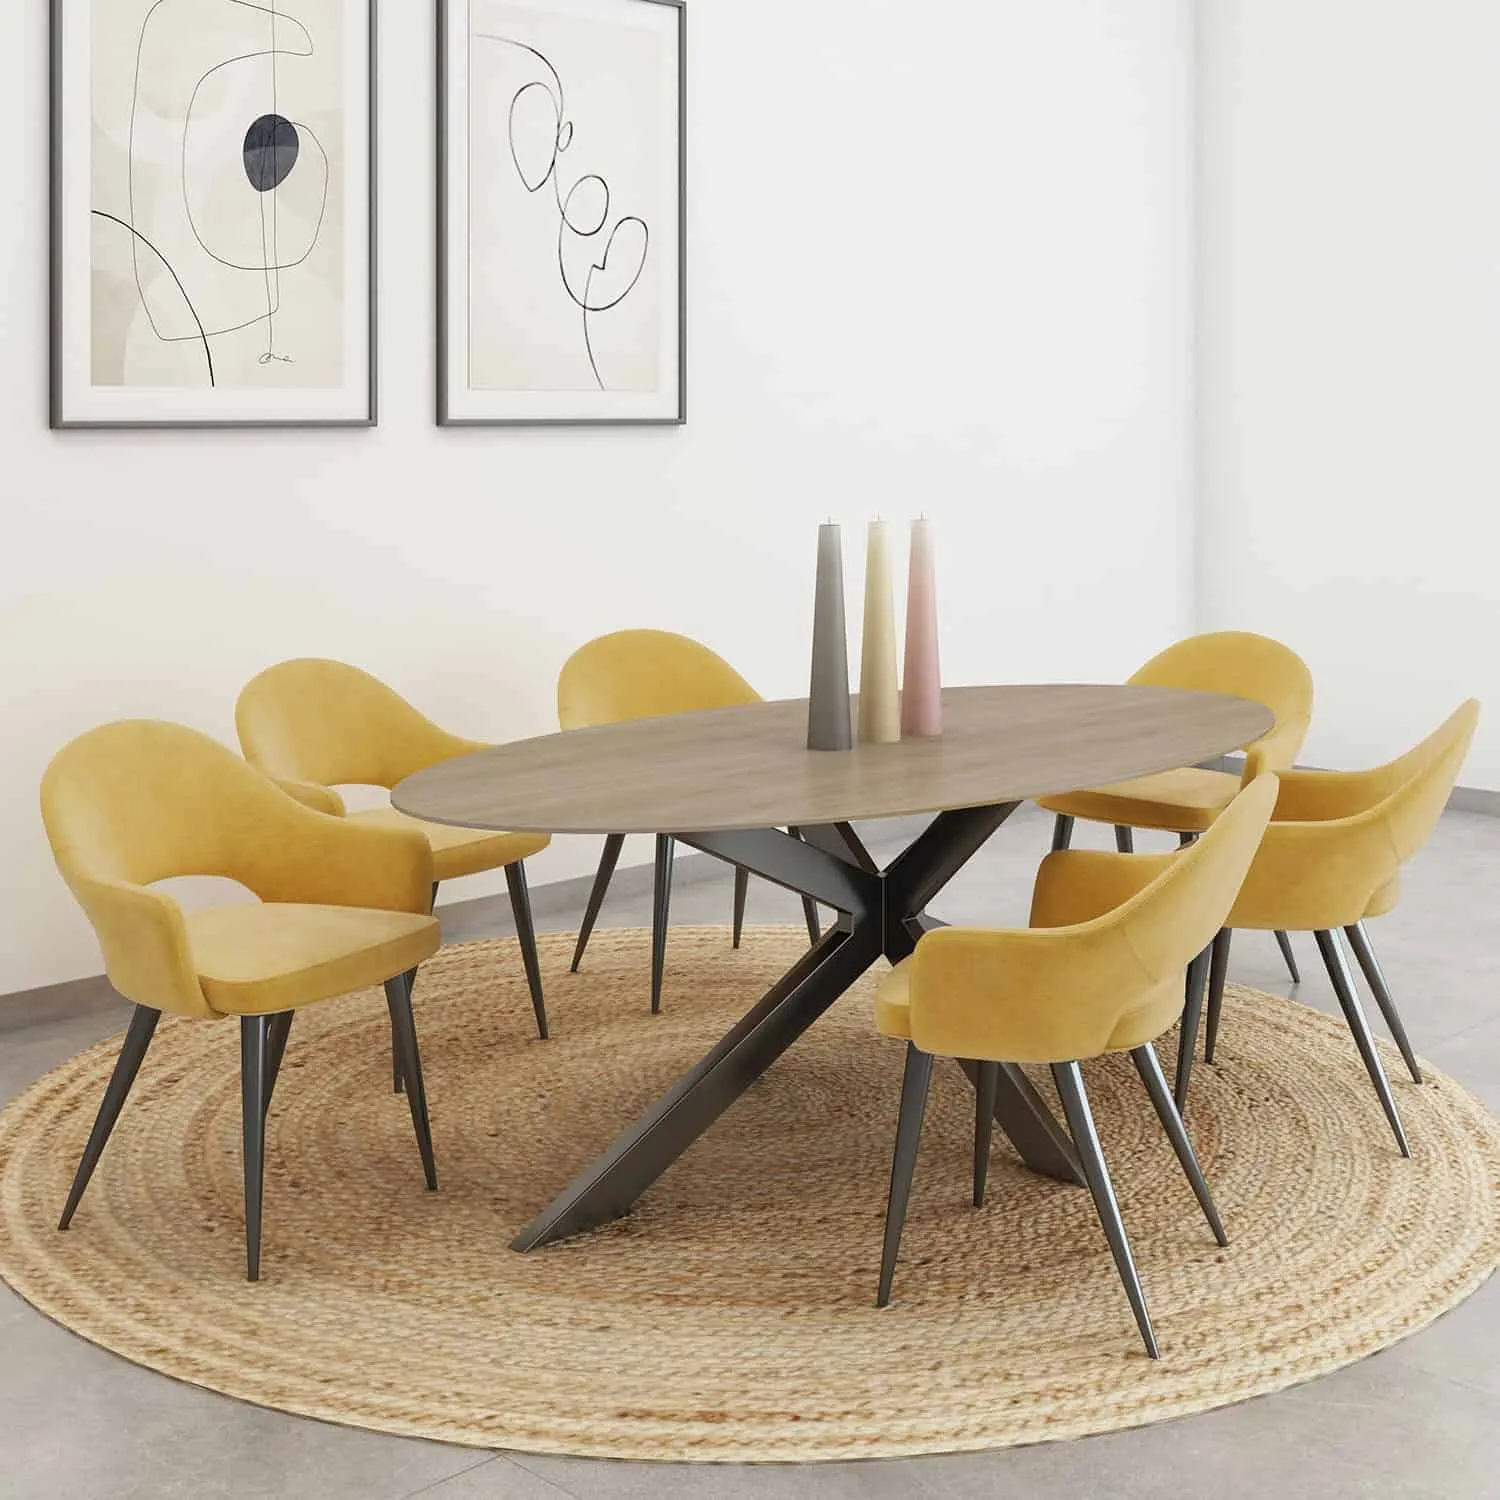 Wooden oval top dining table with 6 yellow chairs, placed on a rug in a room with white walls